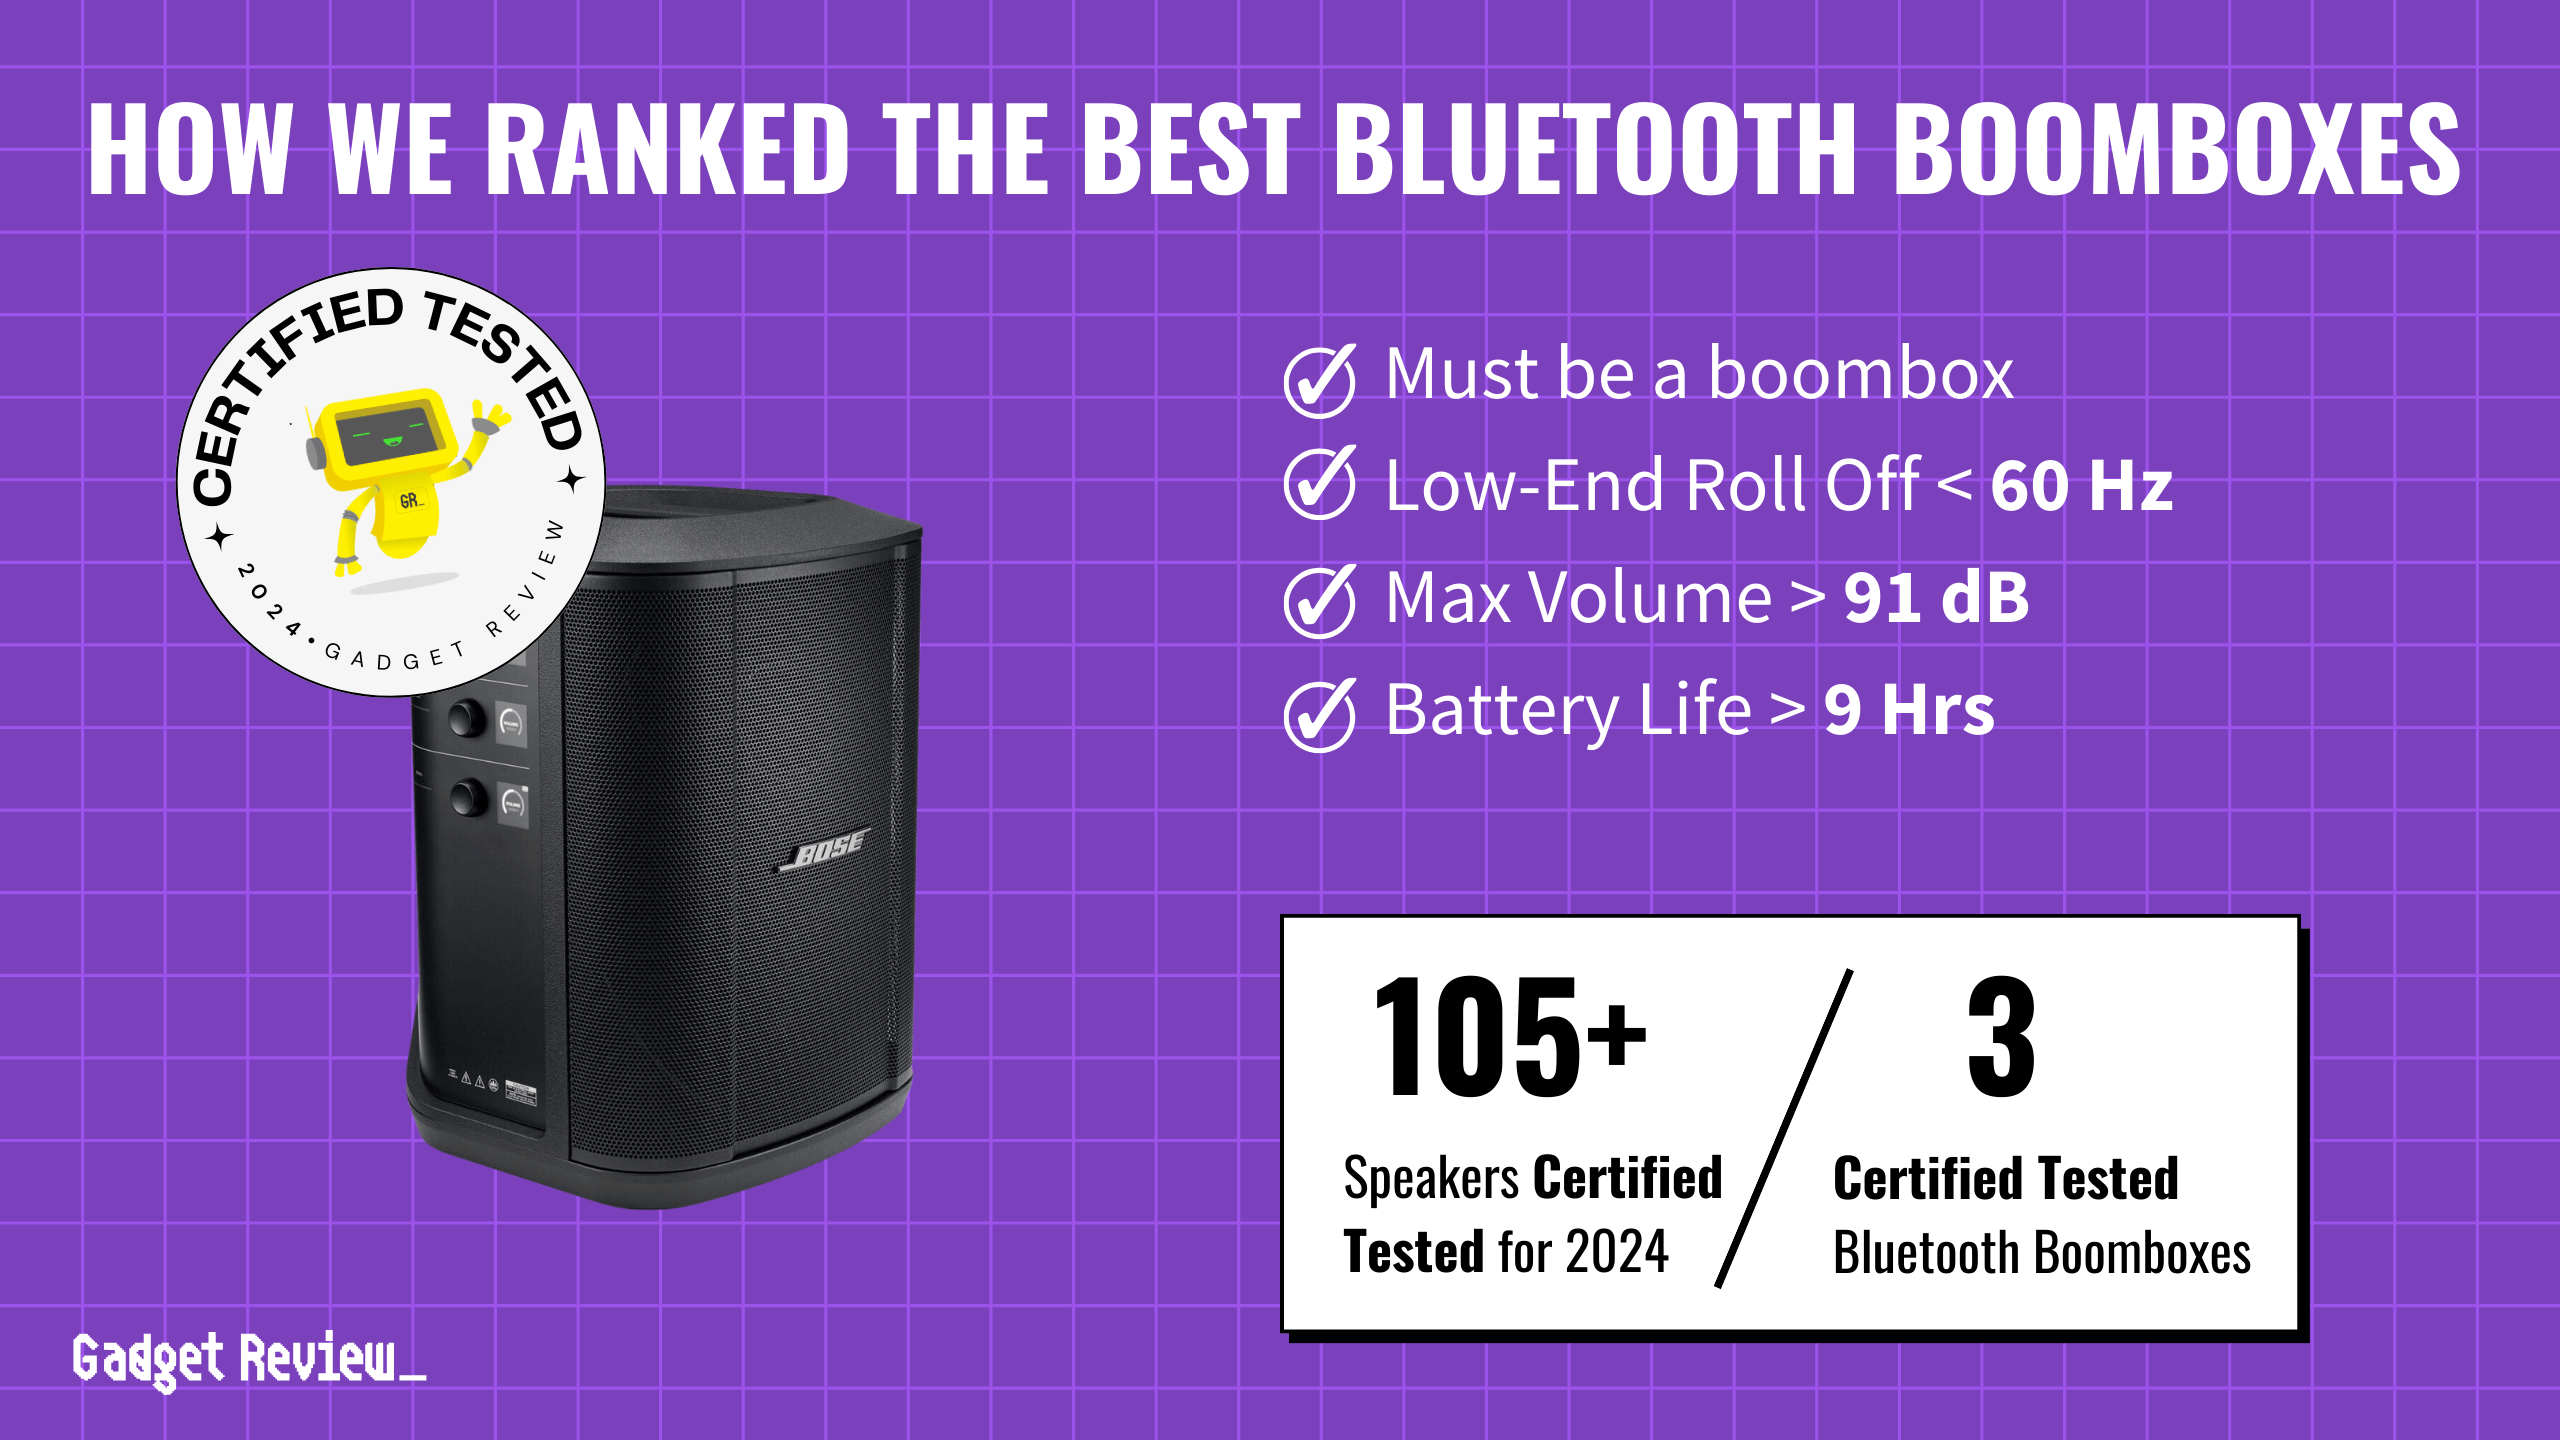 best bluetooth boombox guide that shows the top best bluetooth speaker model